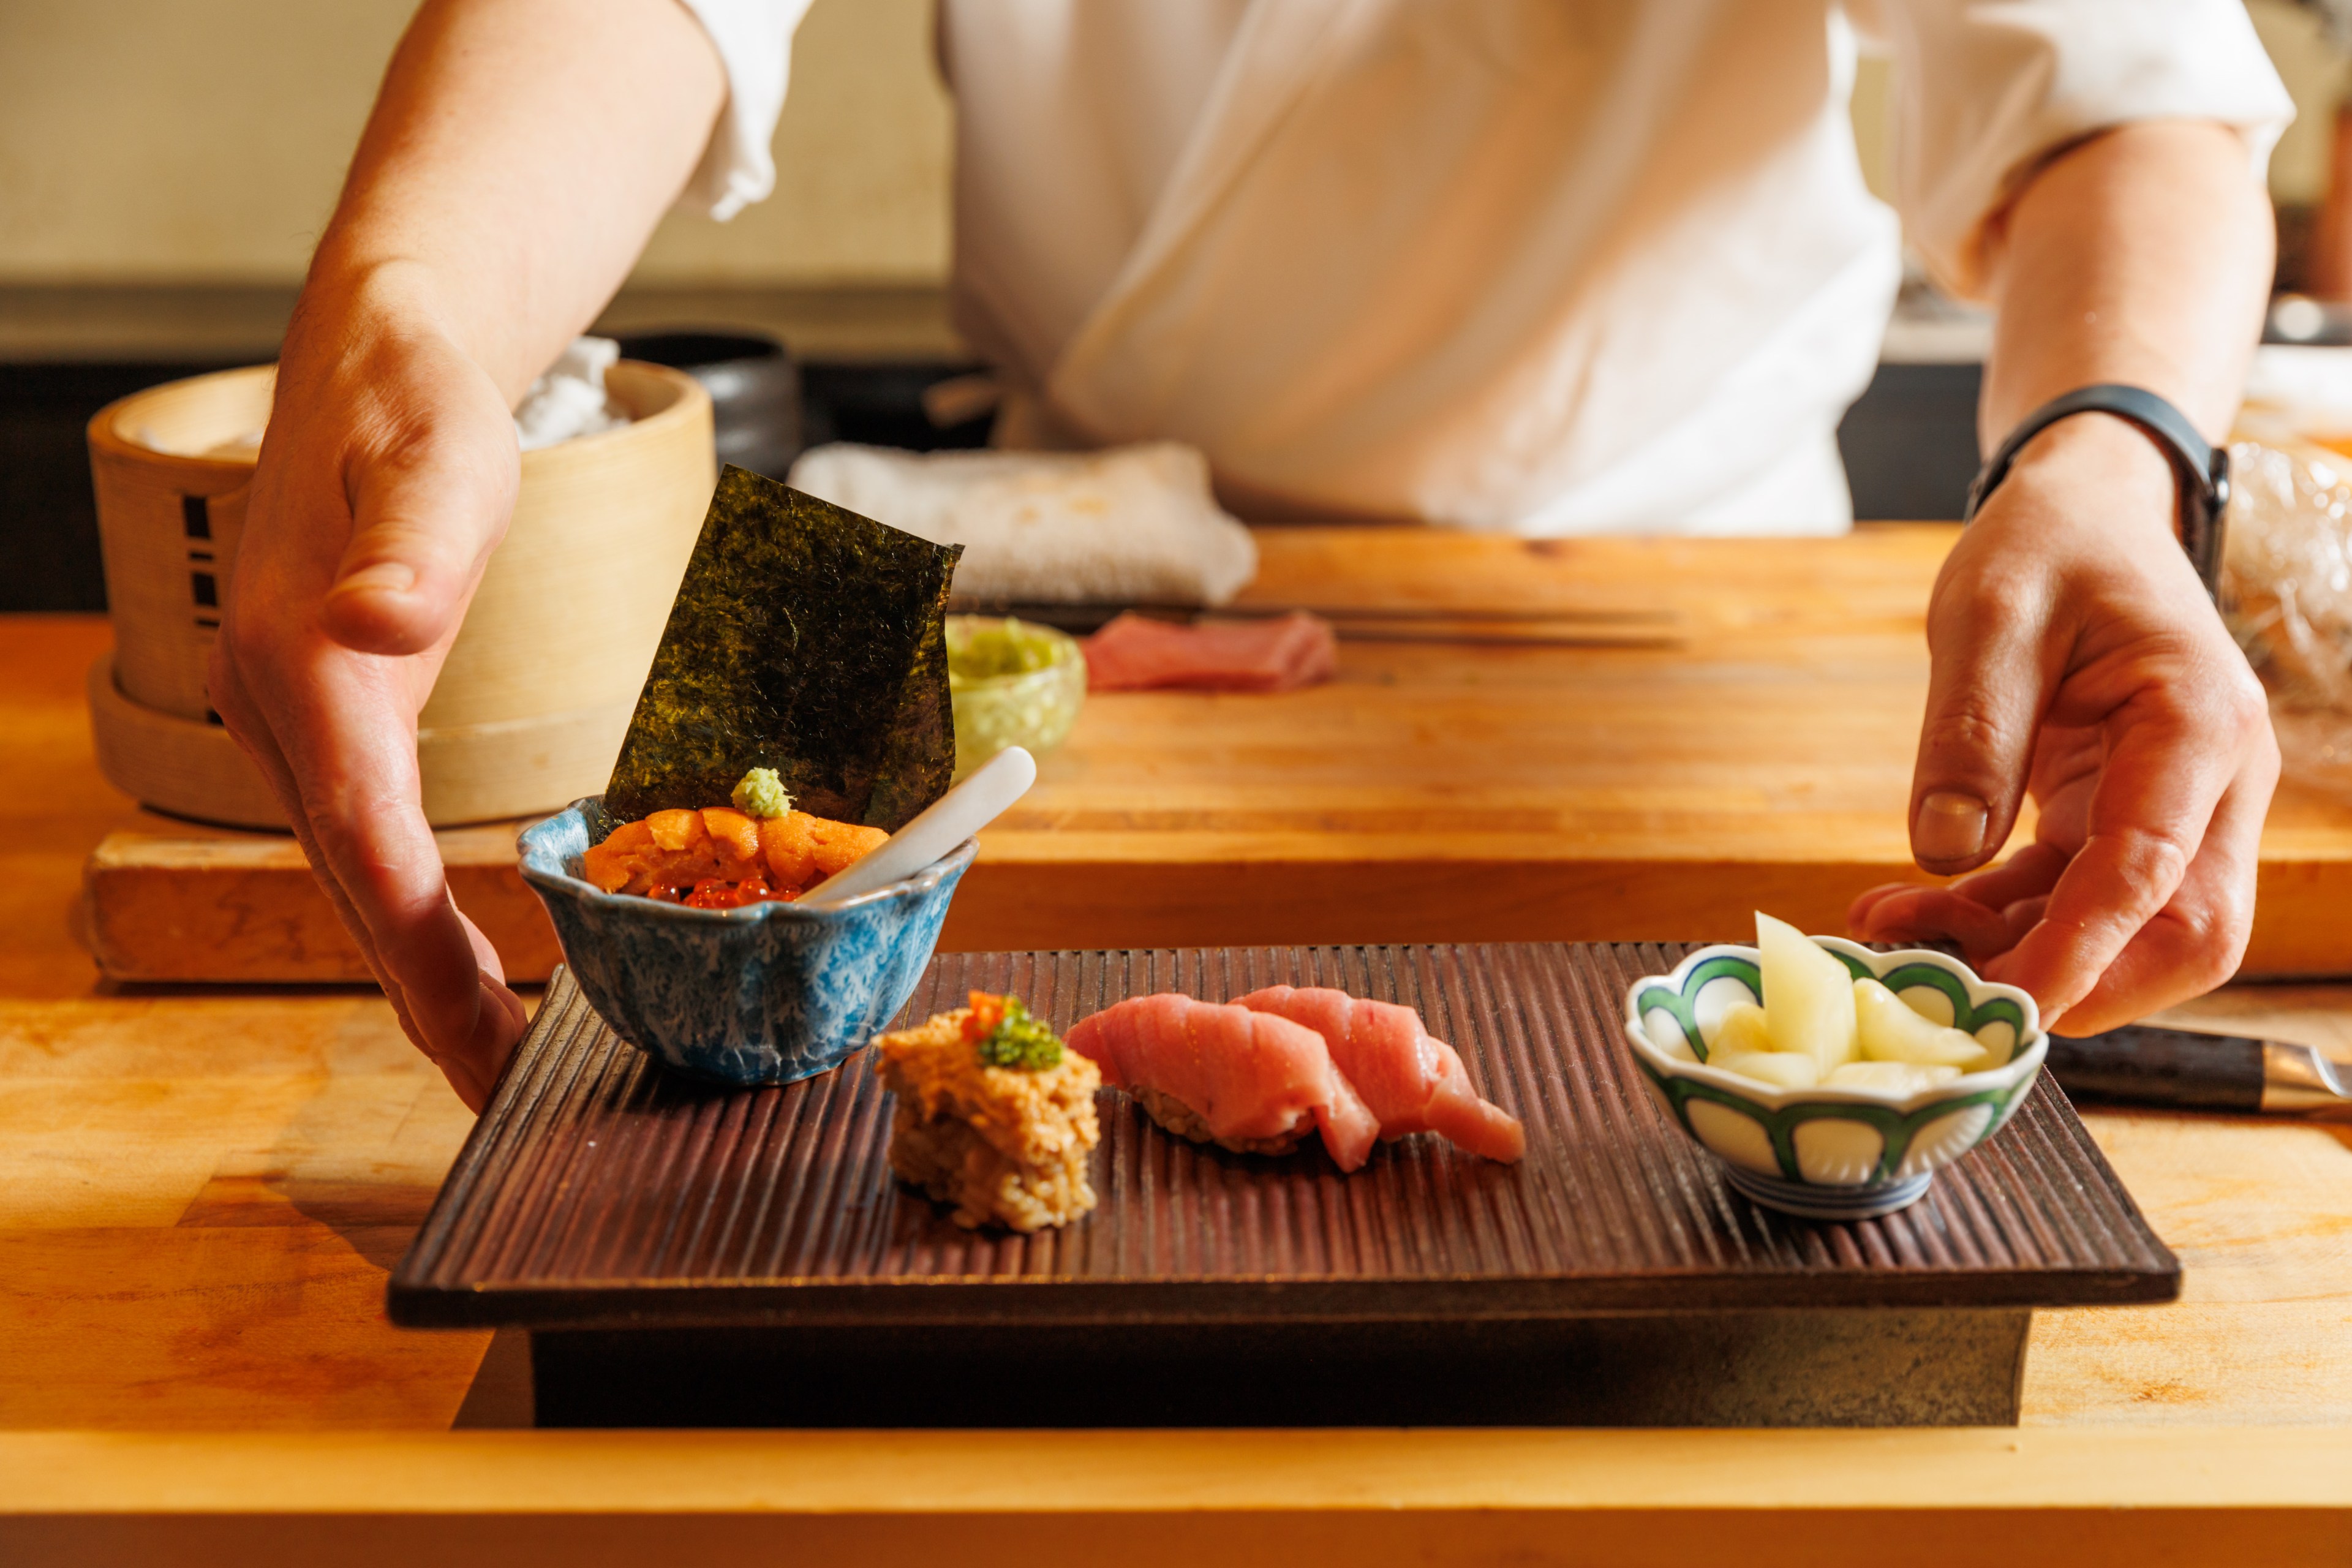 A chef presents a wooden platter with assorted sushi, including a blue bowl with seaweed, a small portion of sliced pink fish, and a white bowl with pickled vegetables.